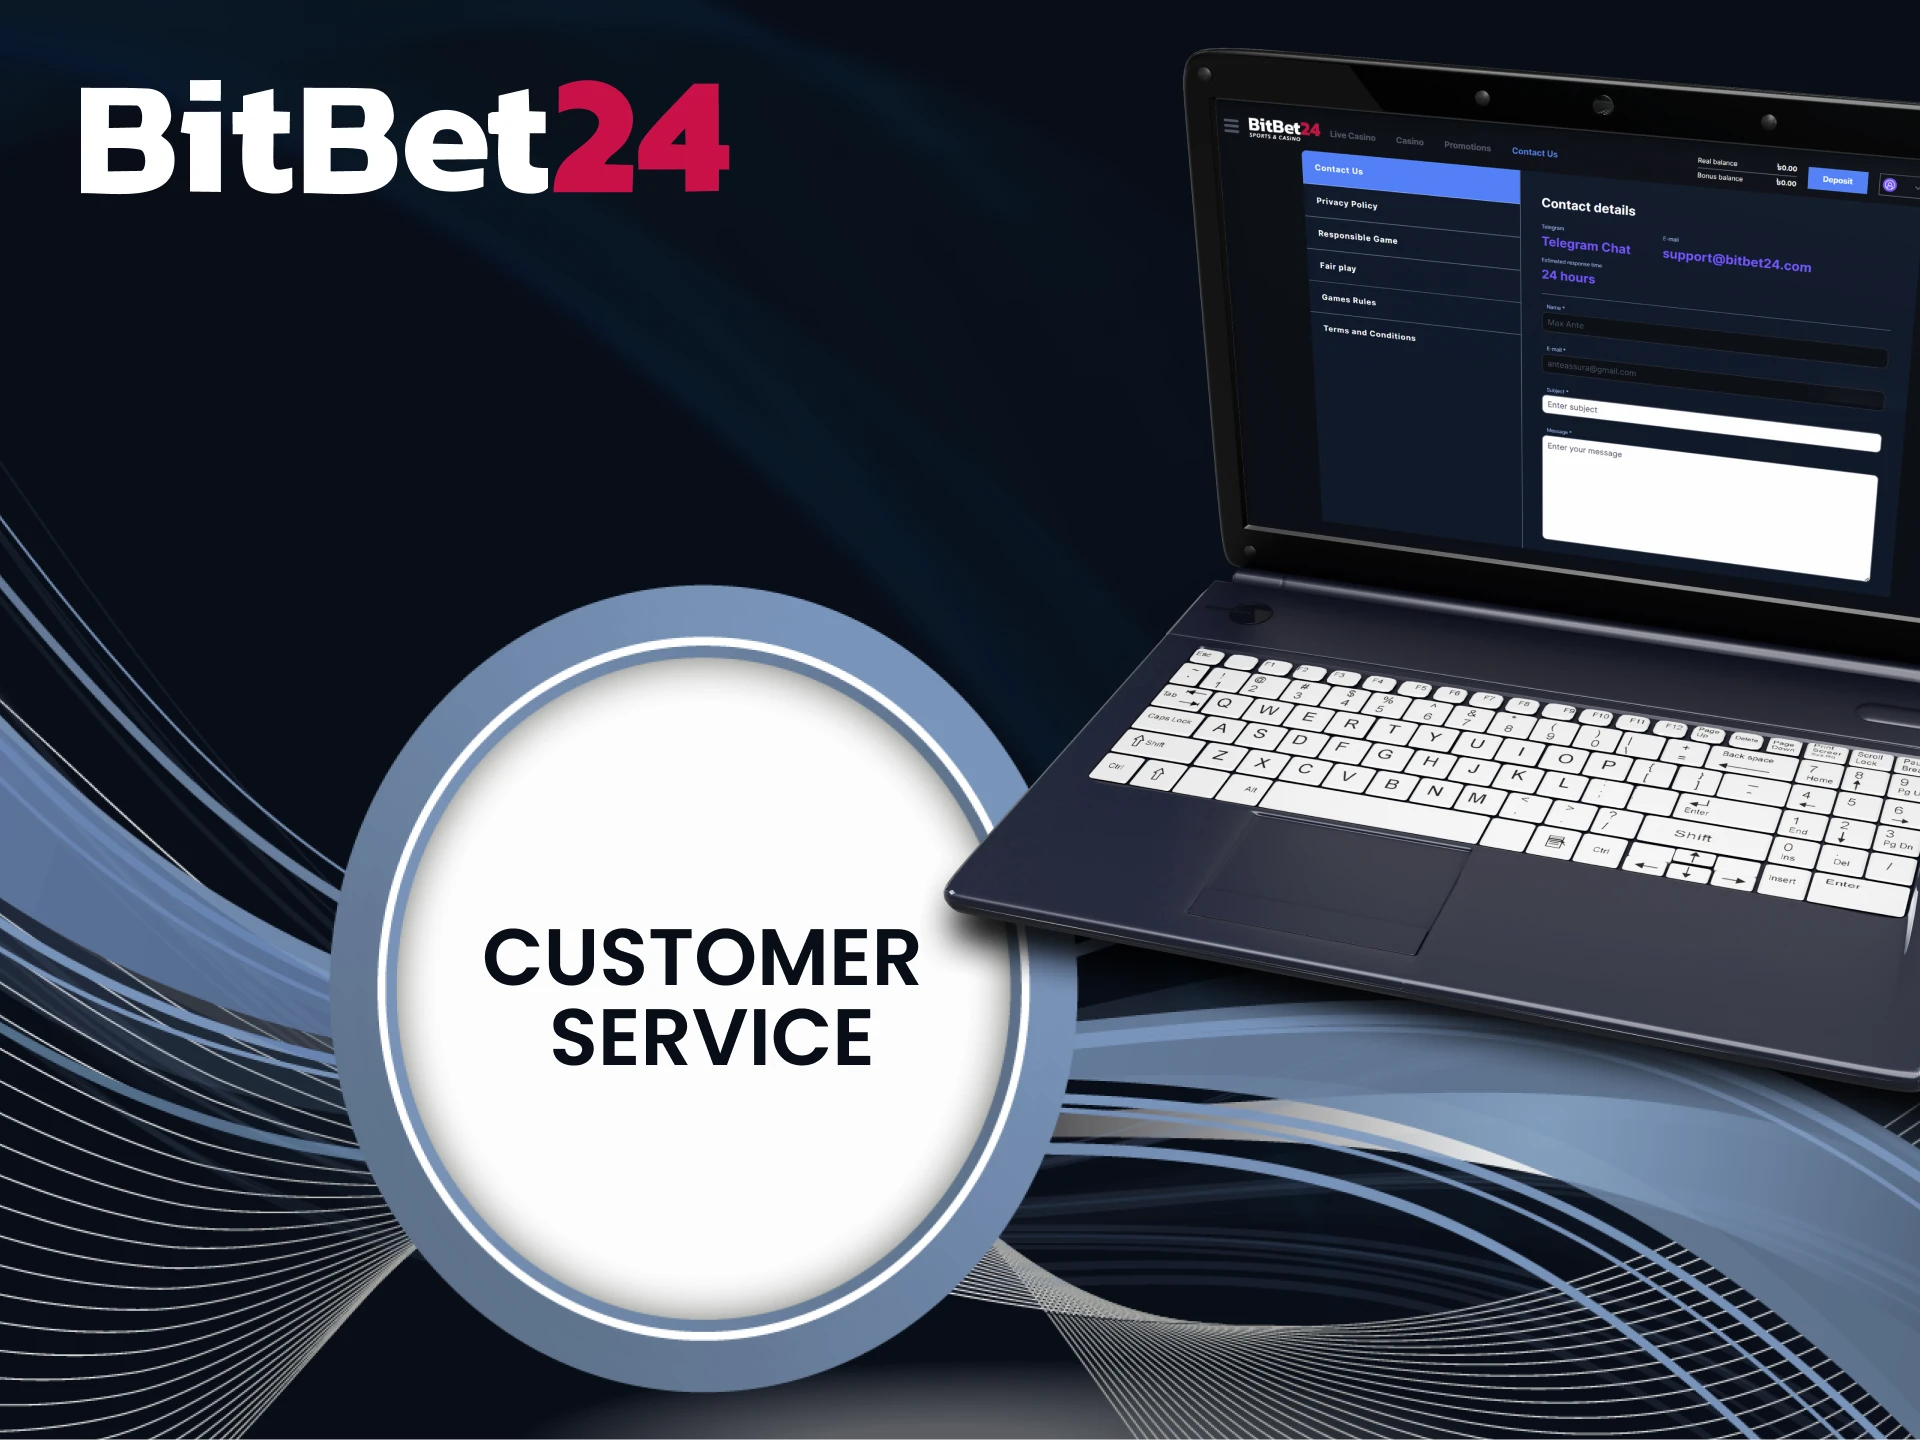 At BitBet24 contact support with any questions.